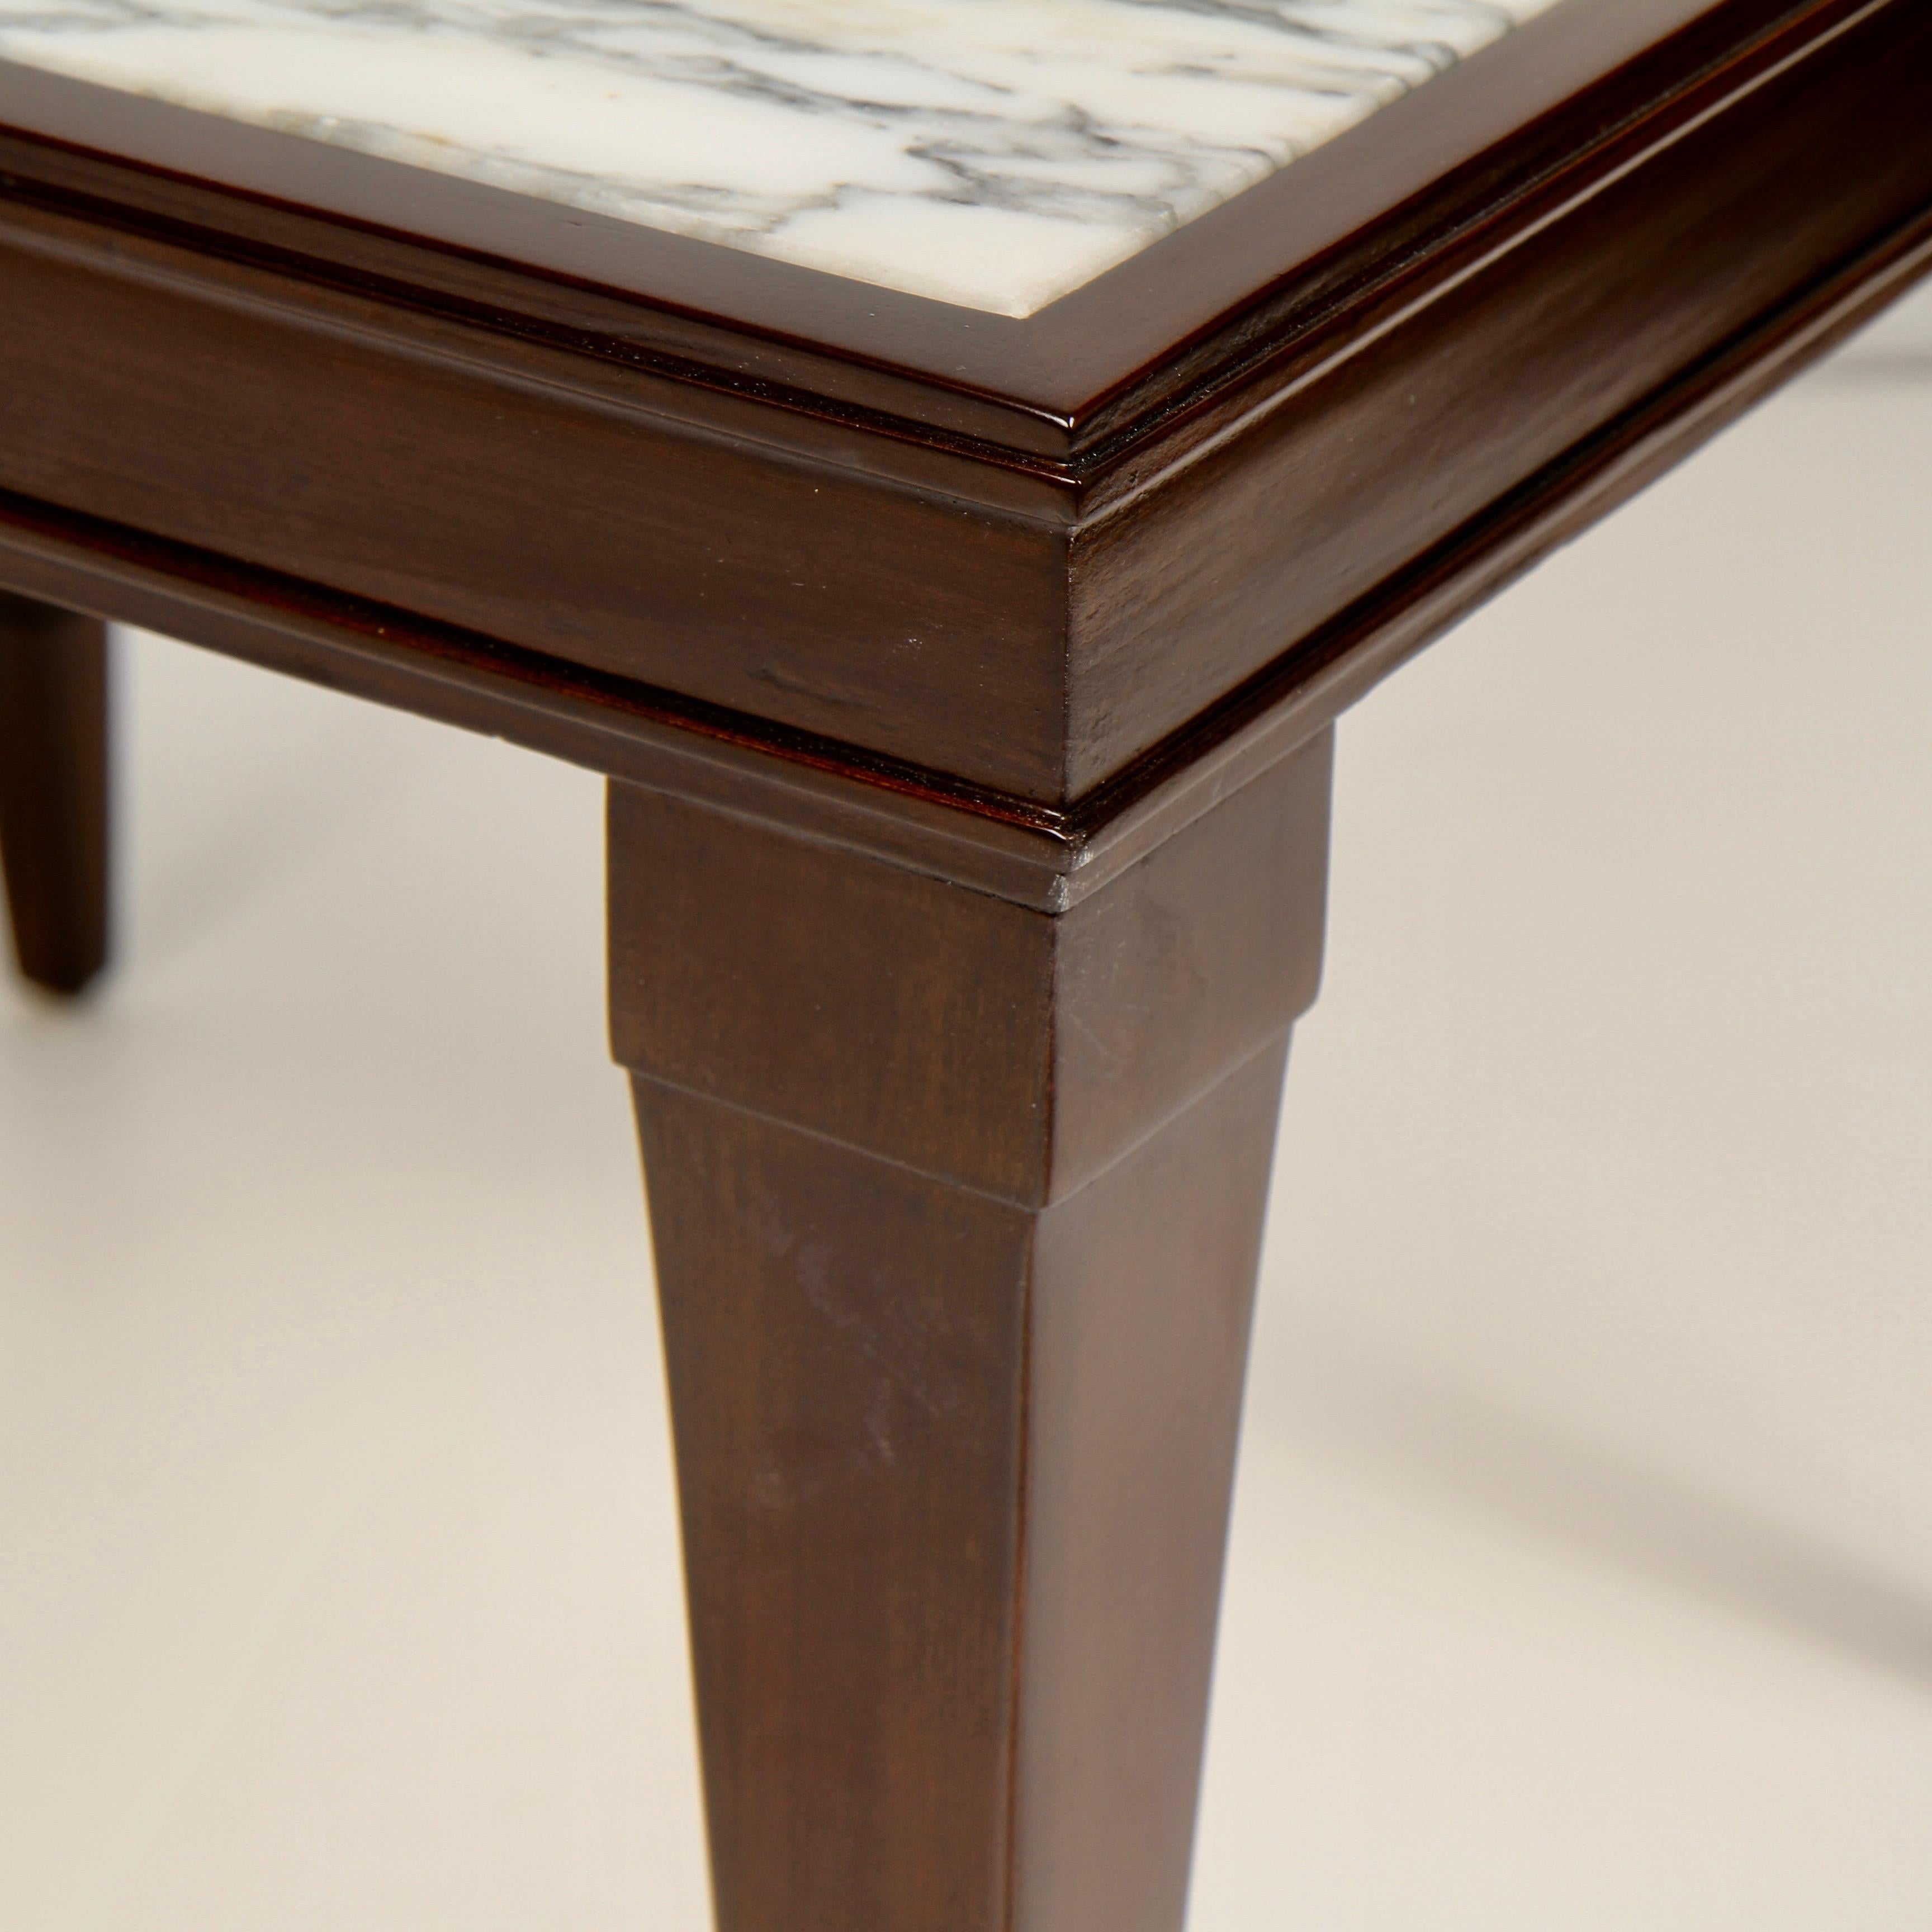 1940s era small marble-topped side table in mahogany by the William A. Burkey Furniture Company. In 1950 ownership of the company passed to the John Widdicomb Company.